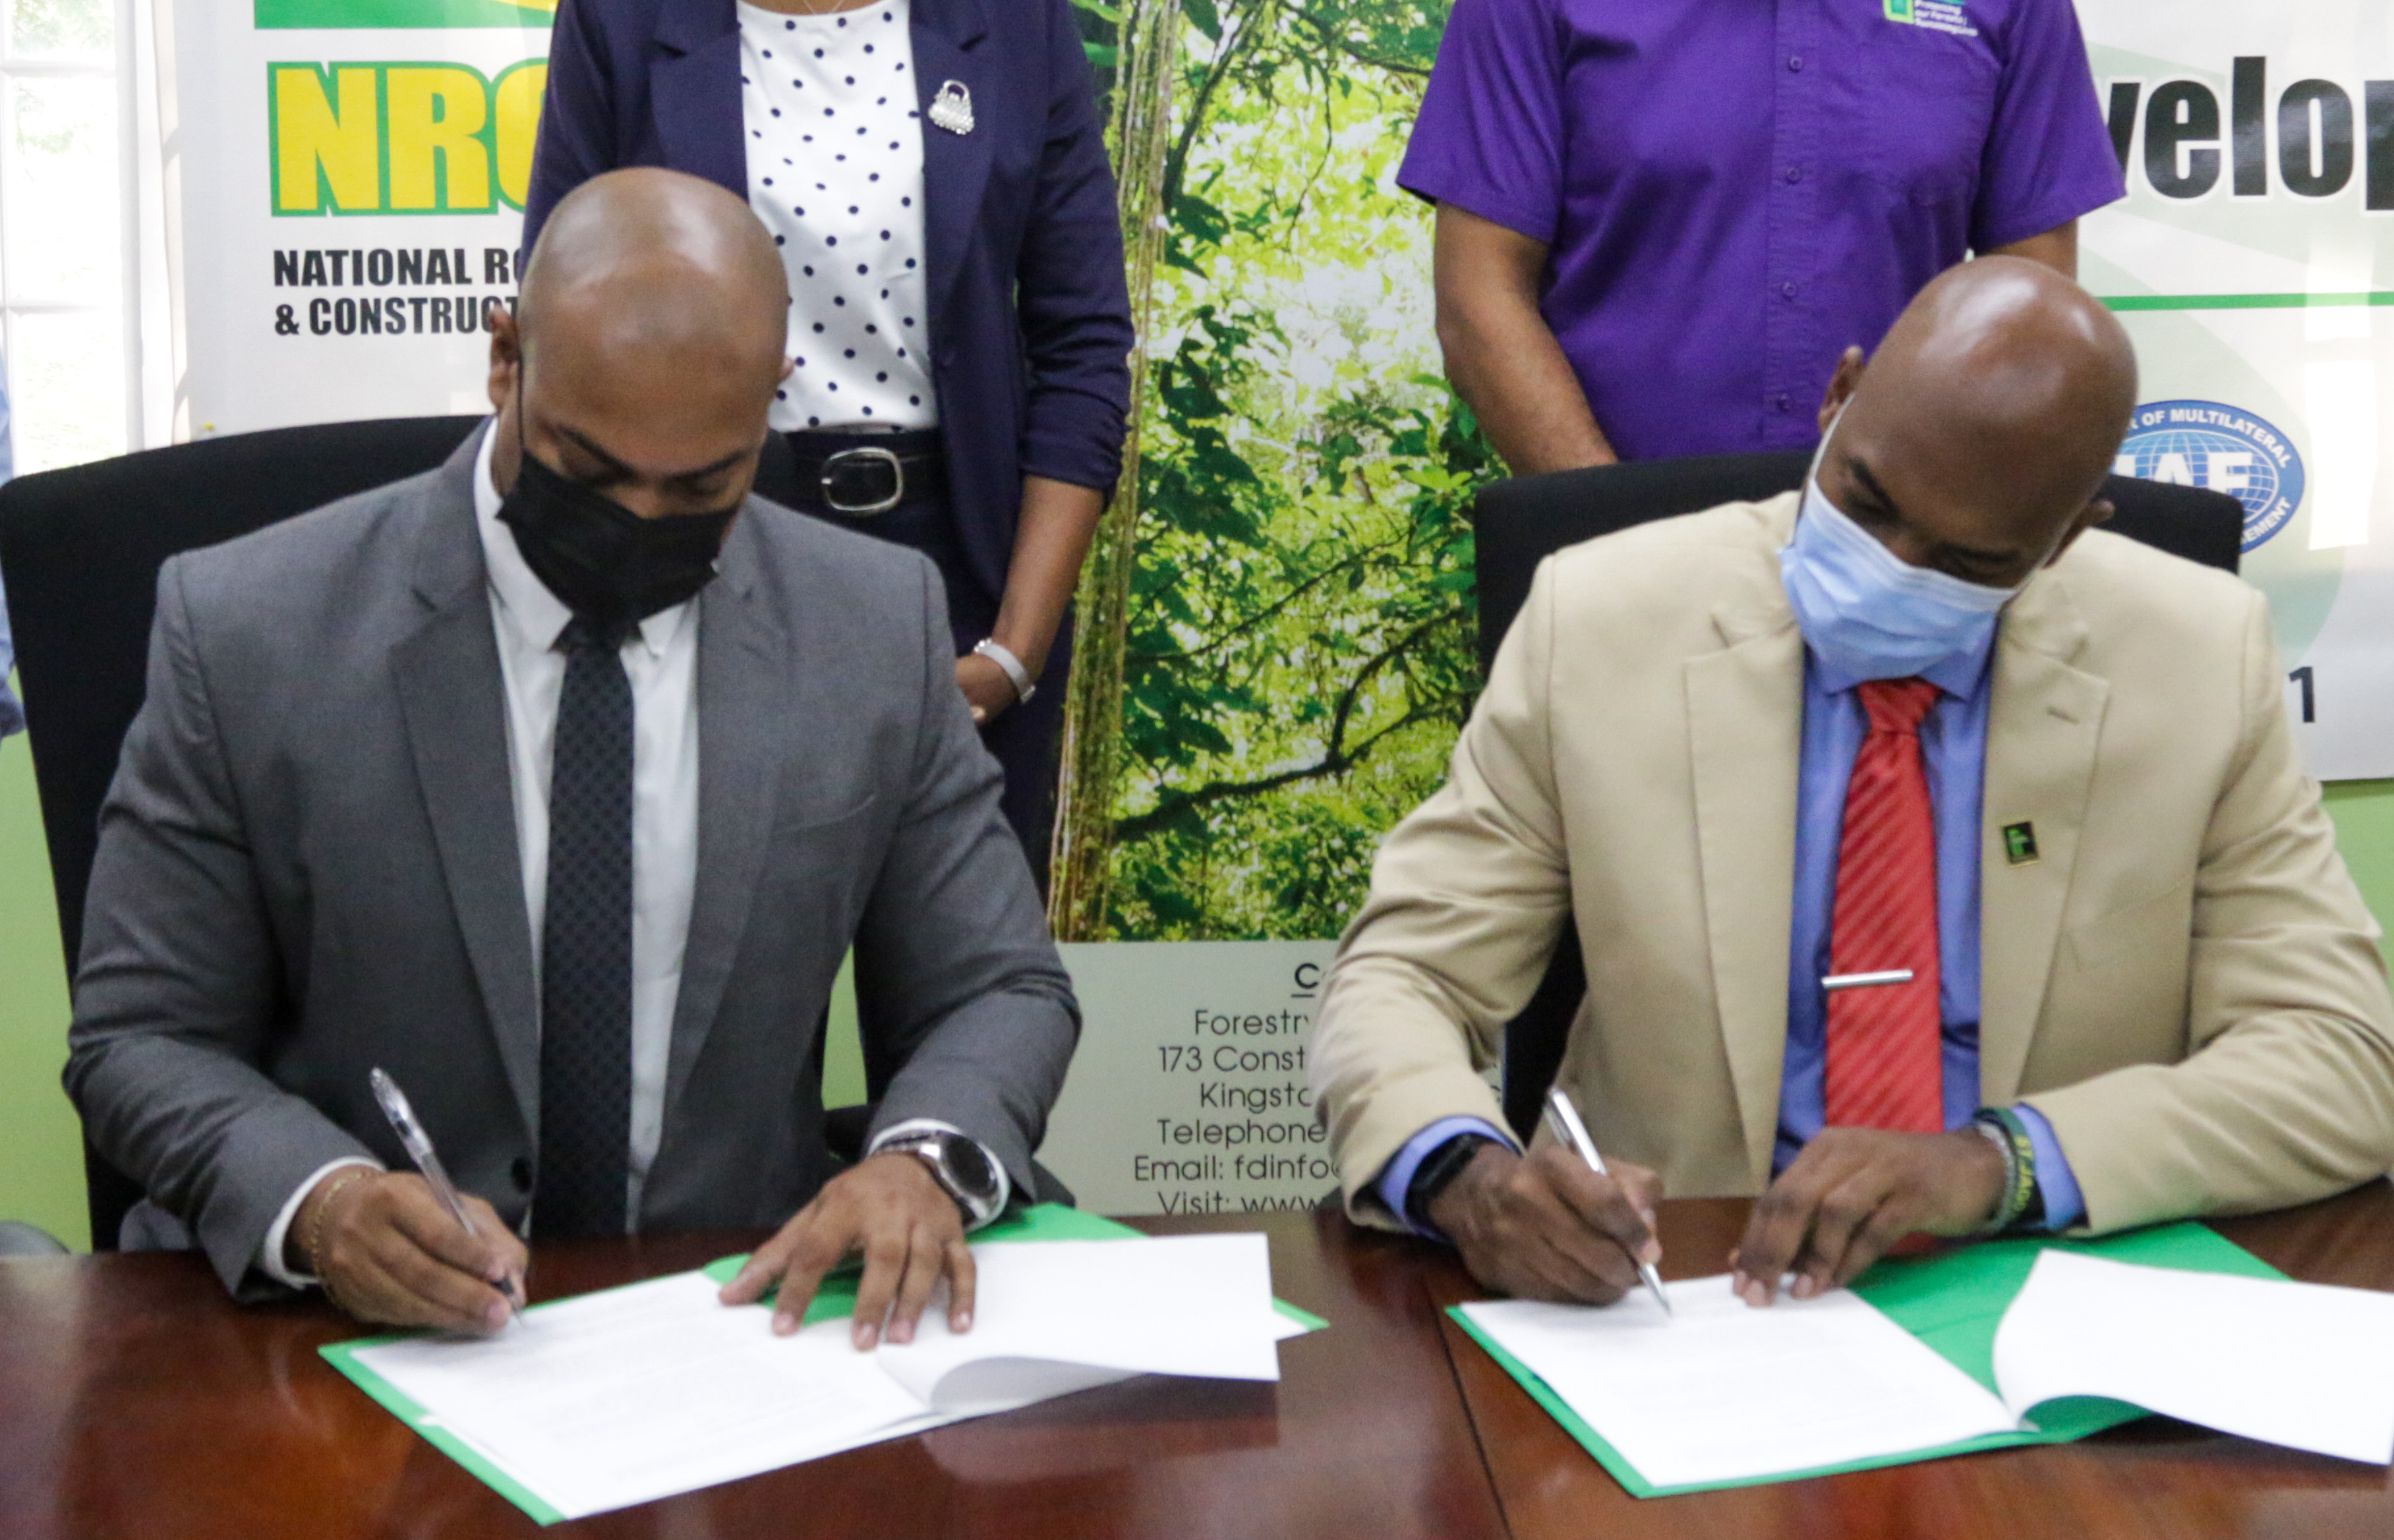 Mr. Stephen Edwards, Managing Director- NROCC and Mr. Ainsley Henry, CEO & Conservator of Forests – Forestry Department